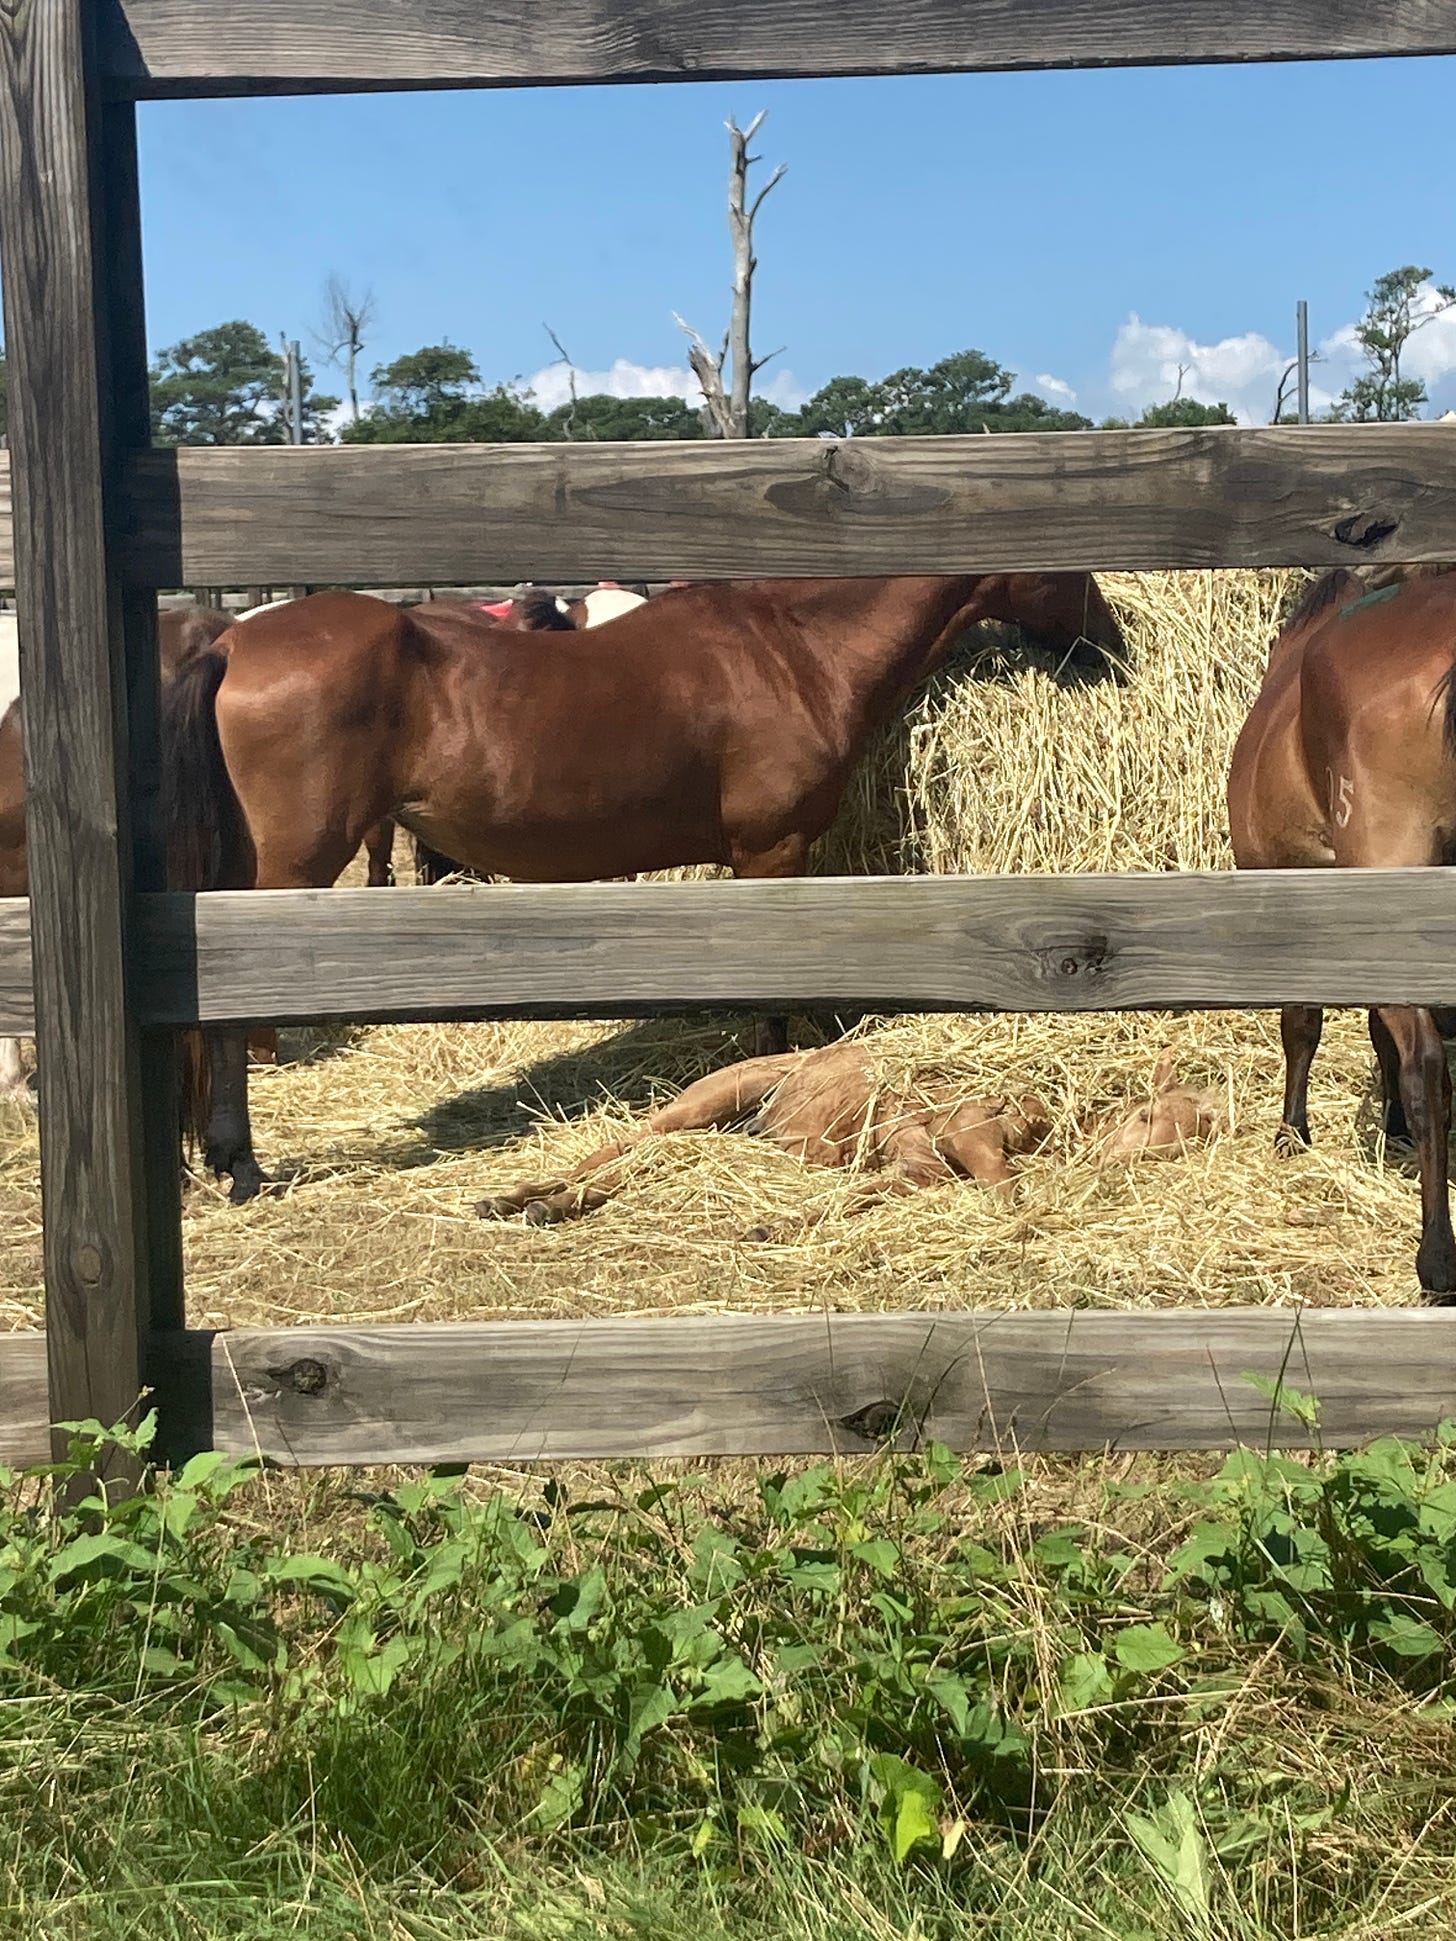 A herd of ponies, behind a tall wooden fence. The ponies are eating from a bale of hay. A foal is napping, partially coated in hay, in the center at the base of the haybale.